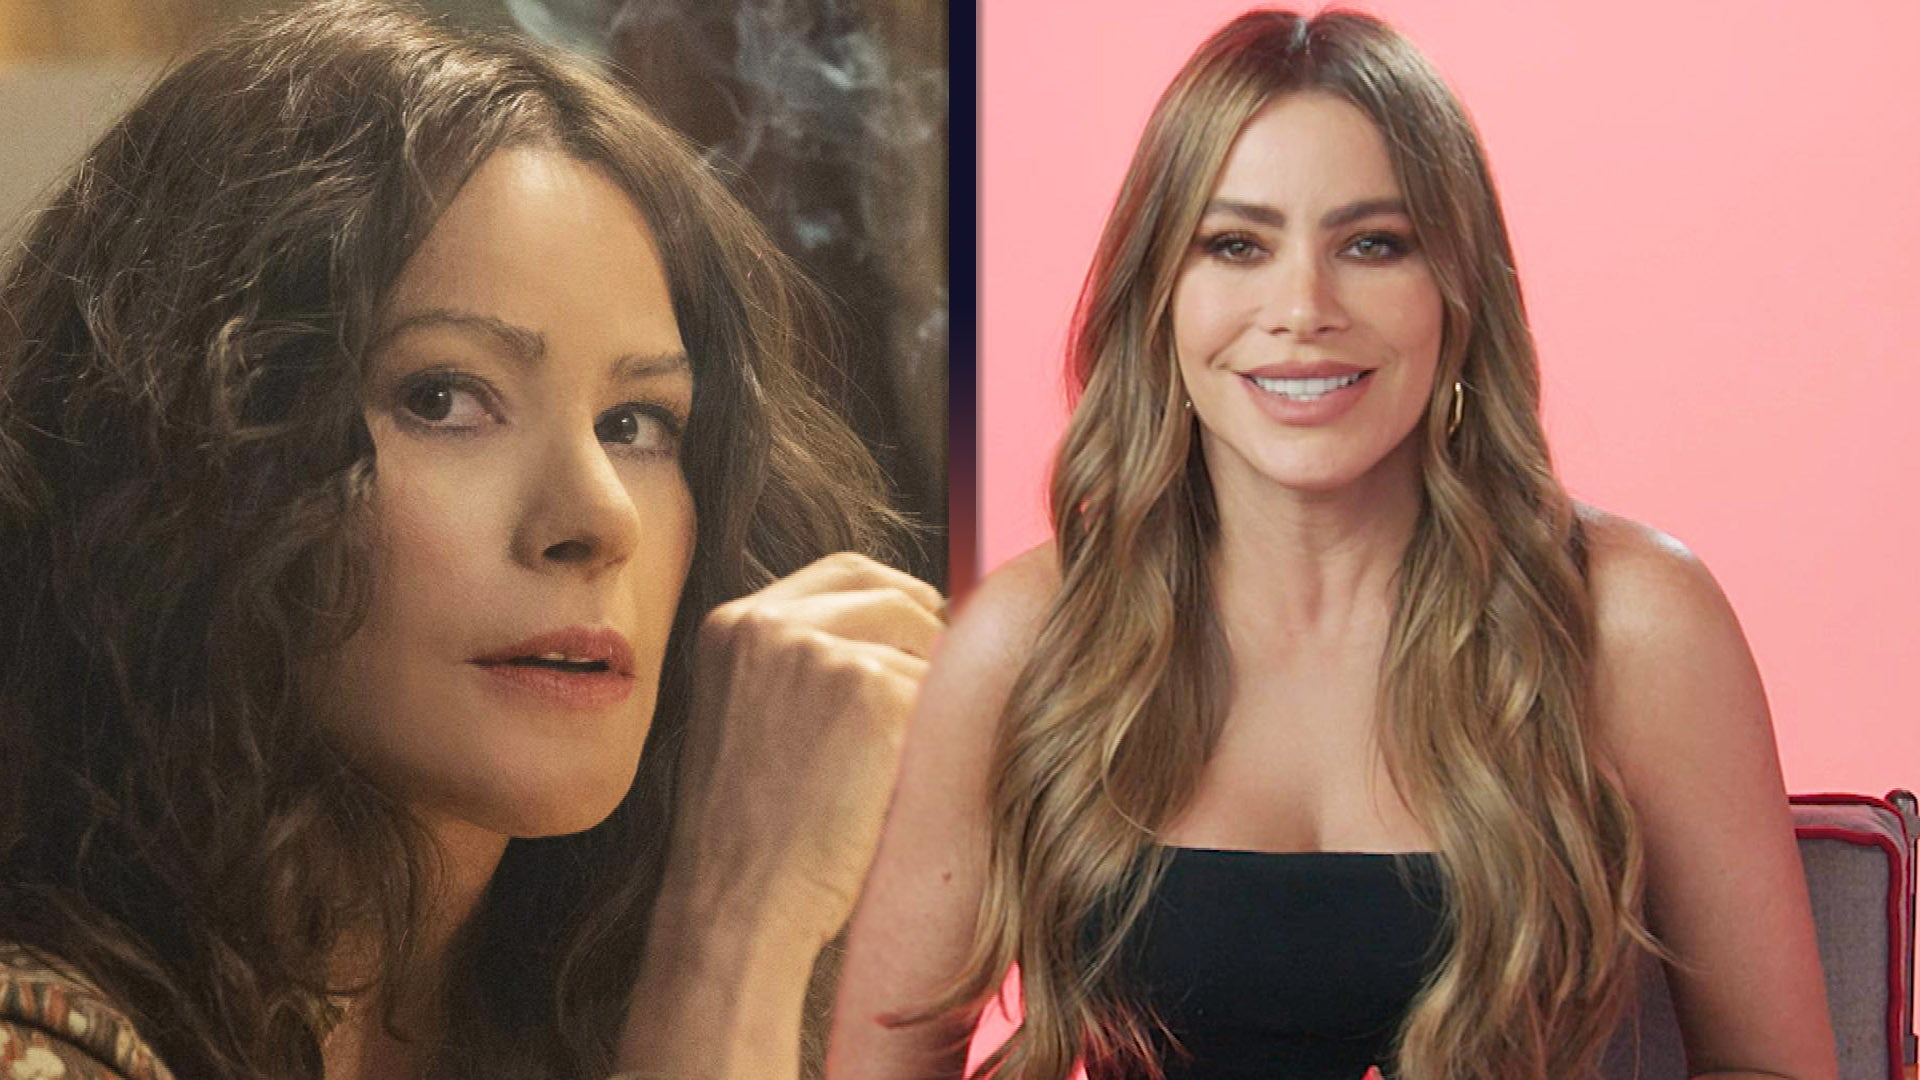 Sofia Vergara Claps Back After Interviewer Seems to Poke Fun at Her English